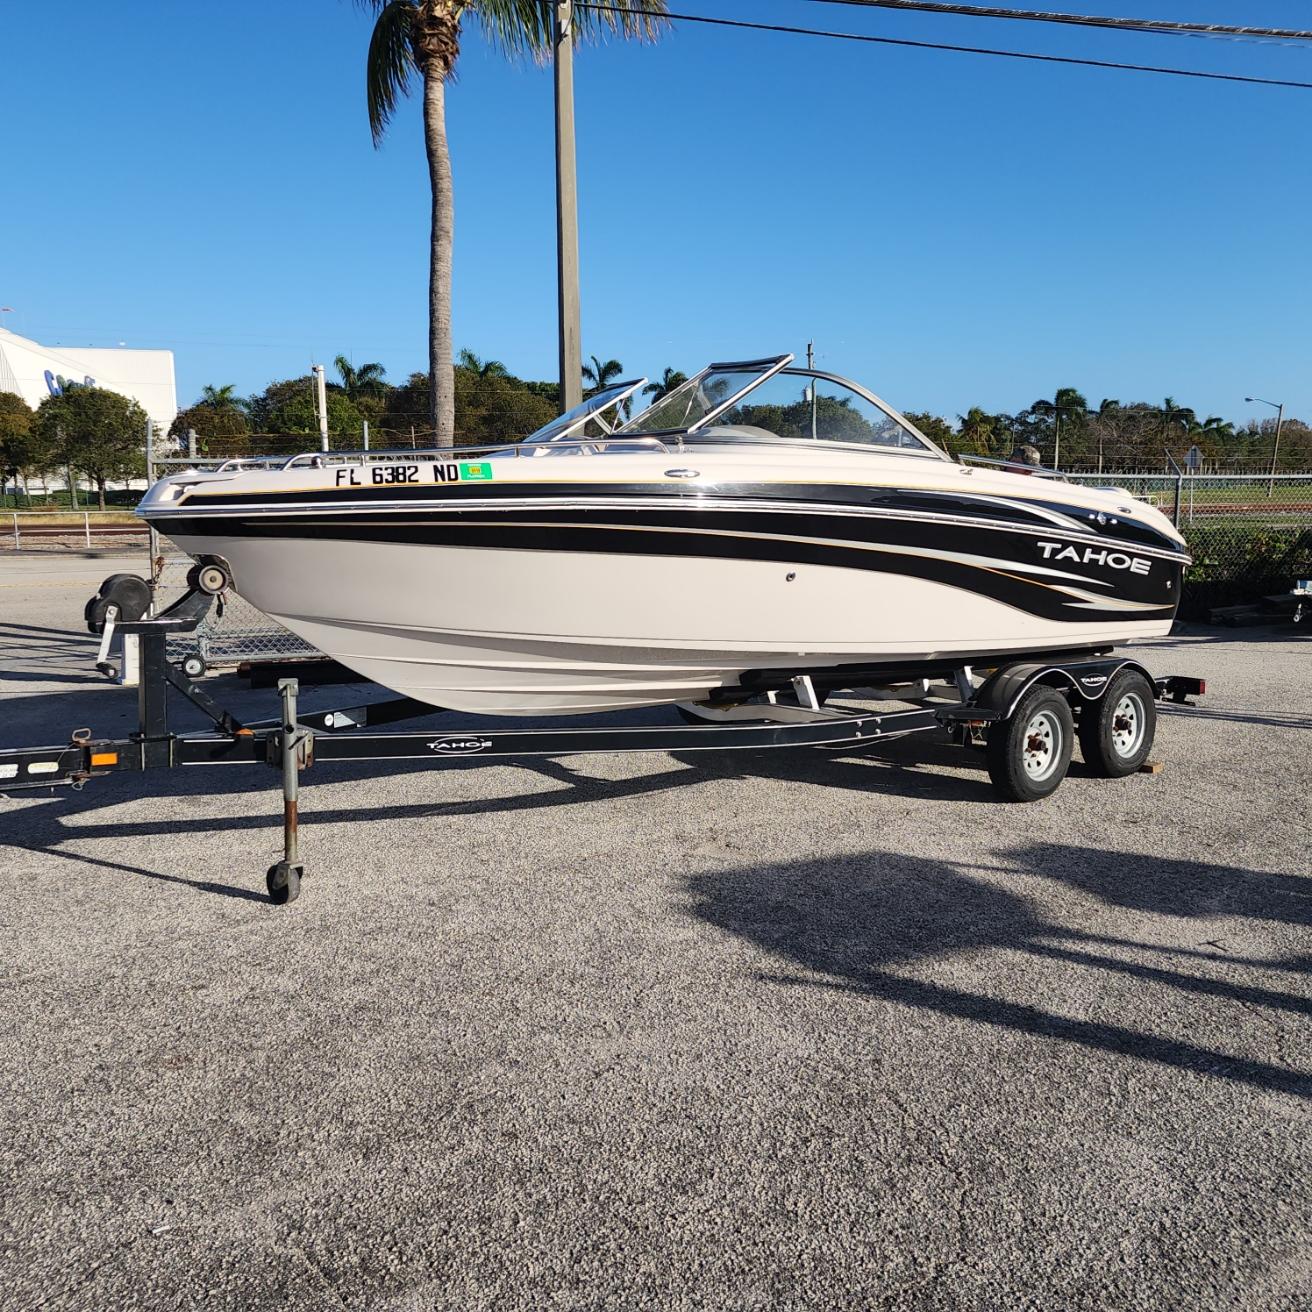 Tahoe boats for sale by owner - Boat Trader